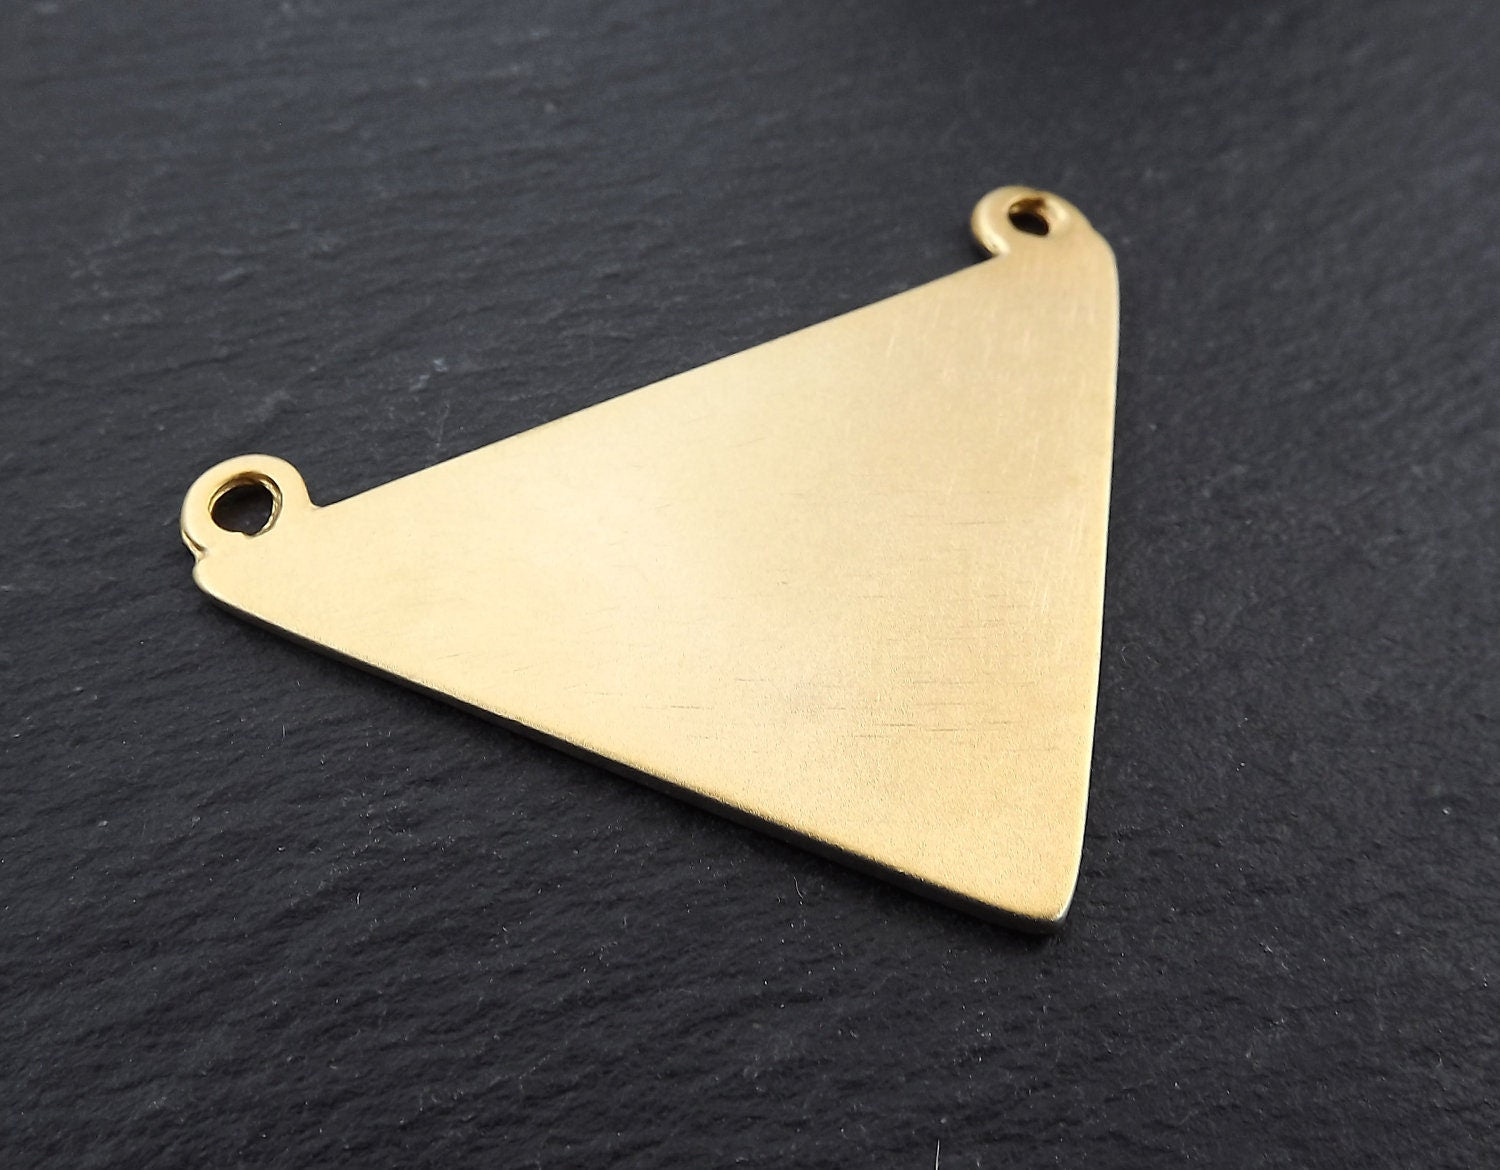 Gold Triangle Pendant, Blank Triangle, Minimalist, Geometric, Statement Pendant, Triangle Connector, Two Loops, 22k Matte Gold Plated, 1 PC